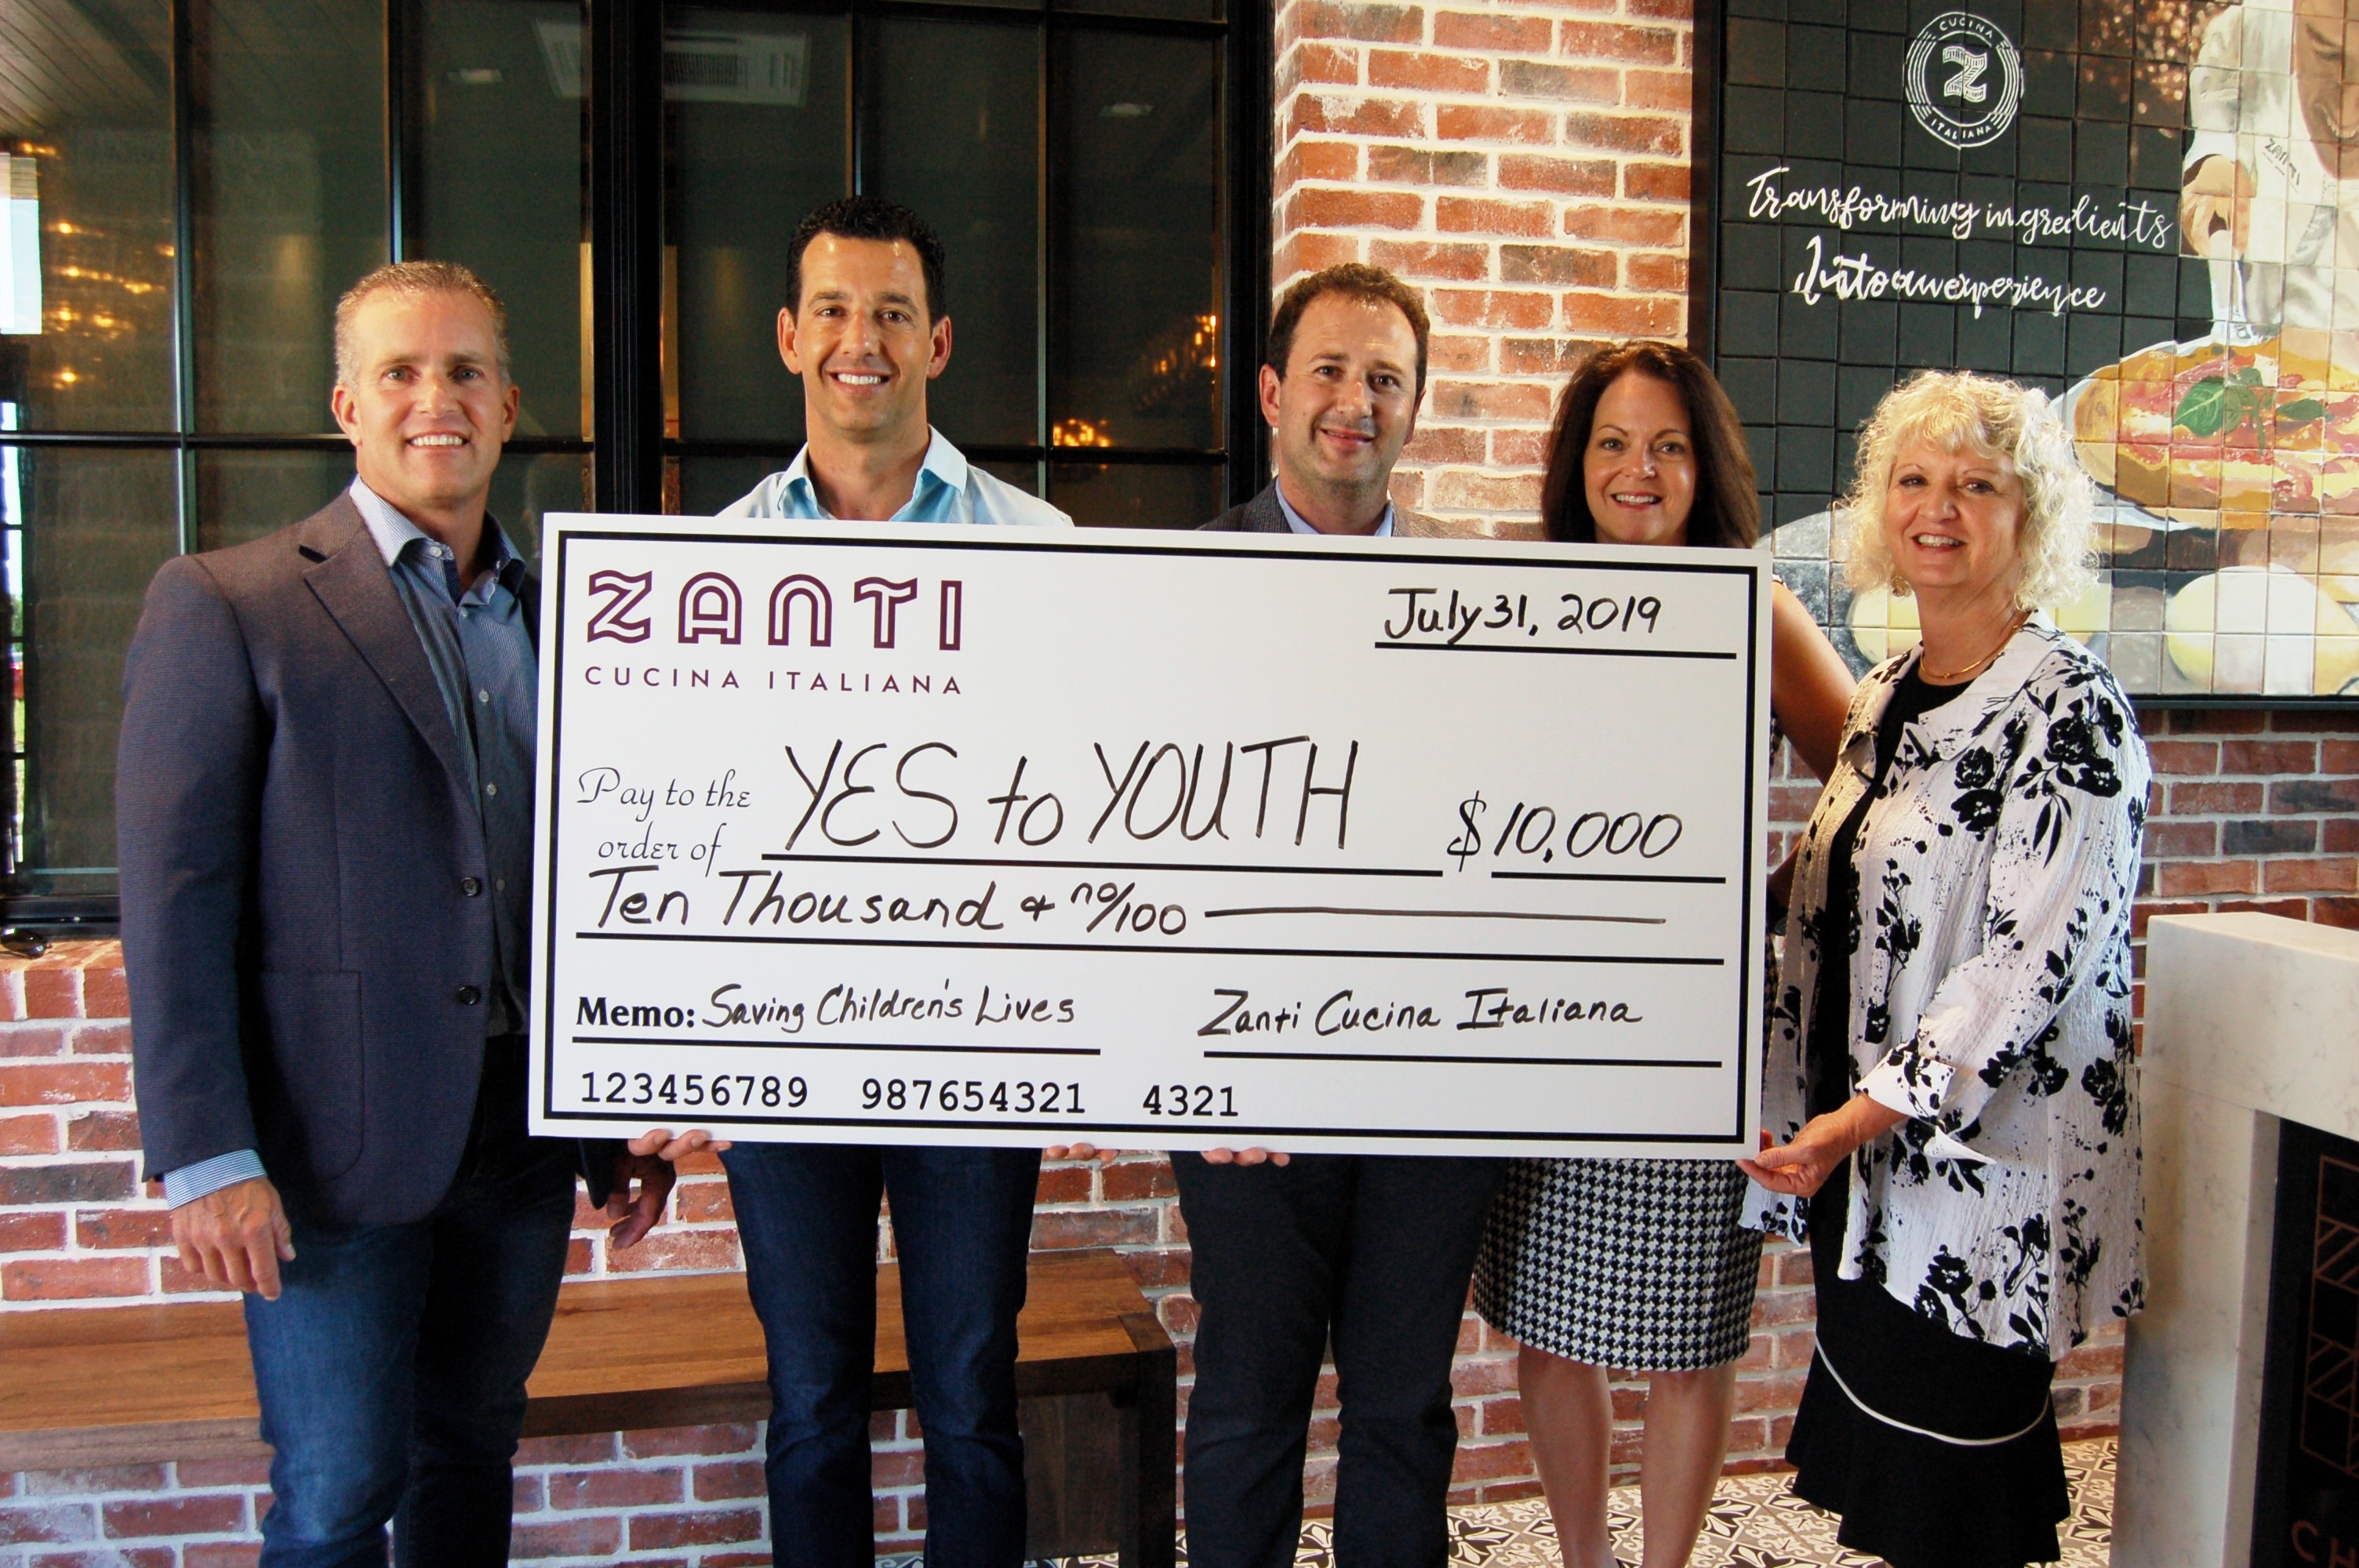 YES to YOUTH is the beneficiary of a $10,000 donation thanks to the newly opened Santi Cucina Italiana restauran